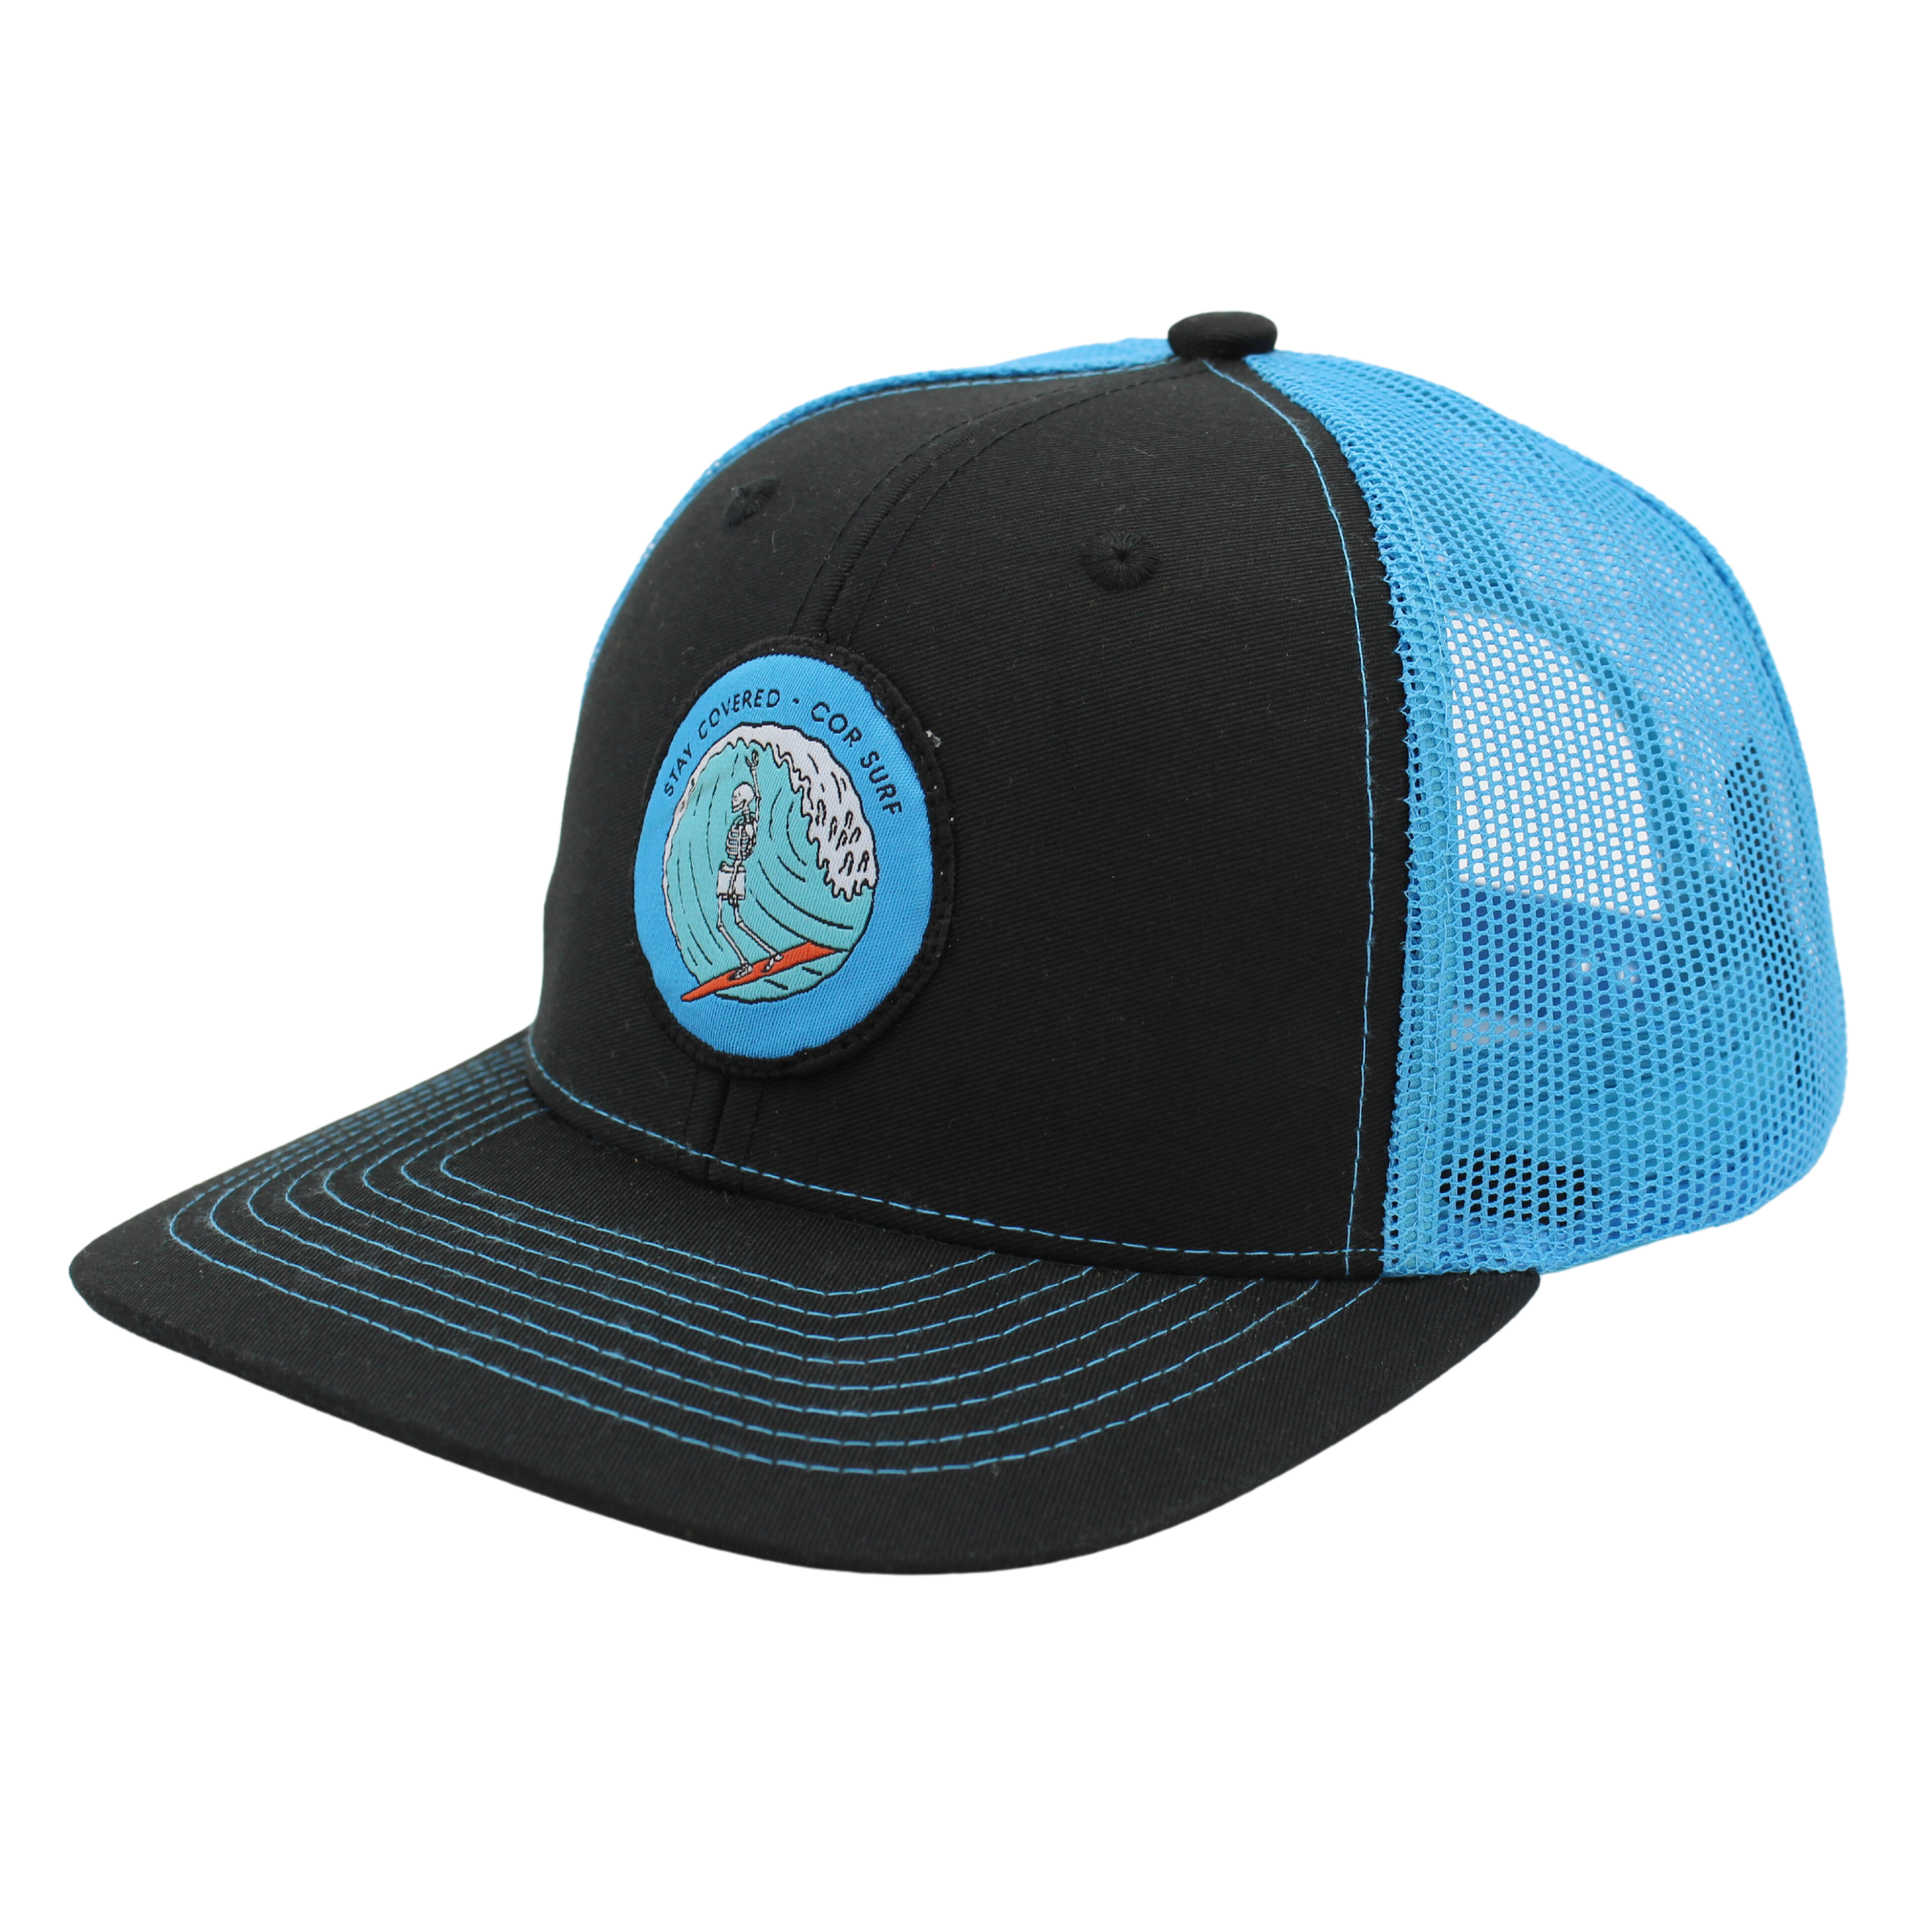 Stay Covered Trucker Hat